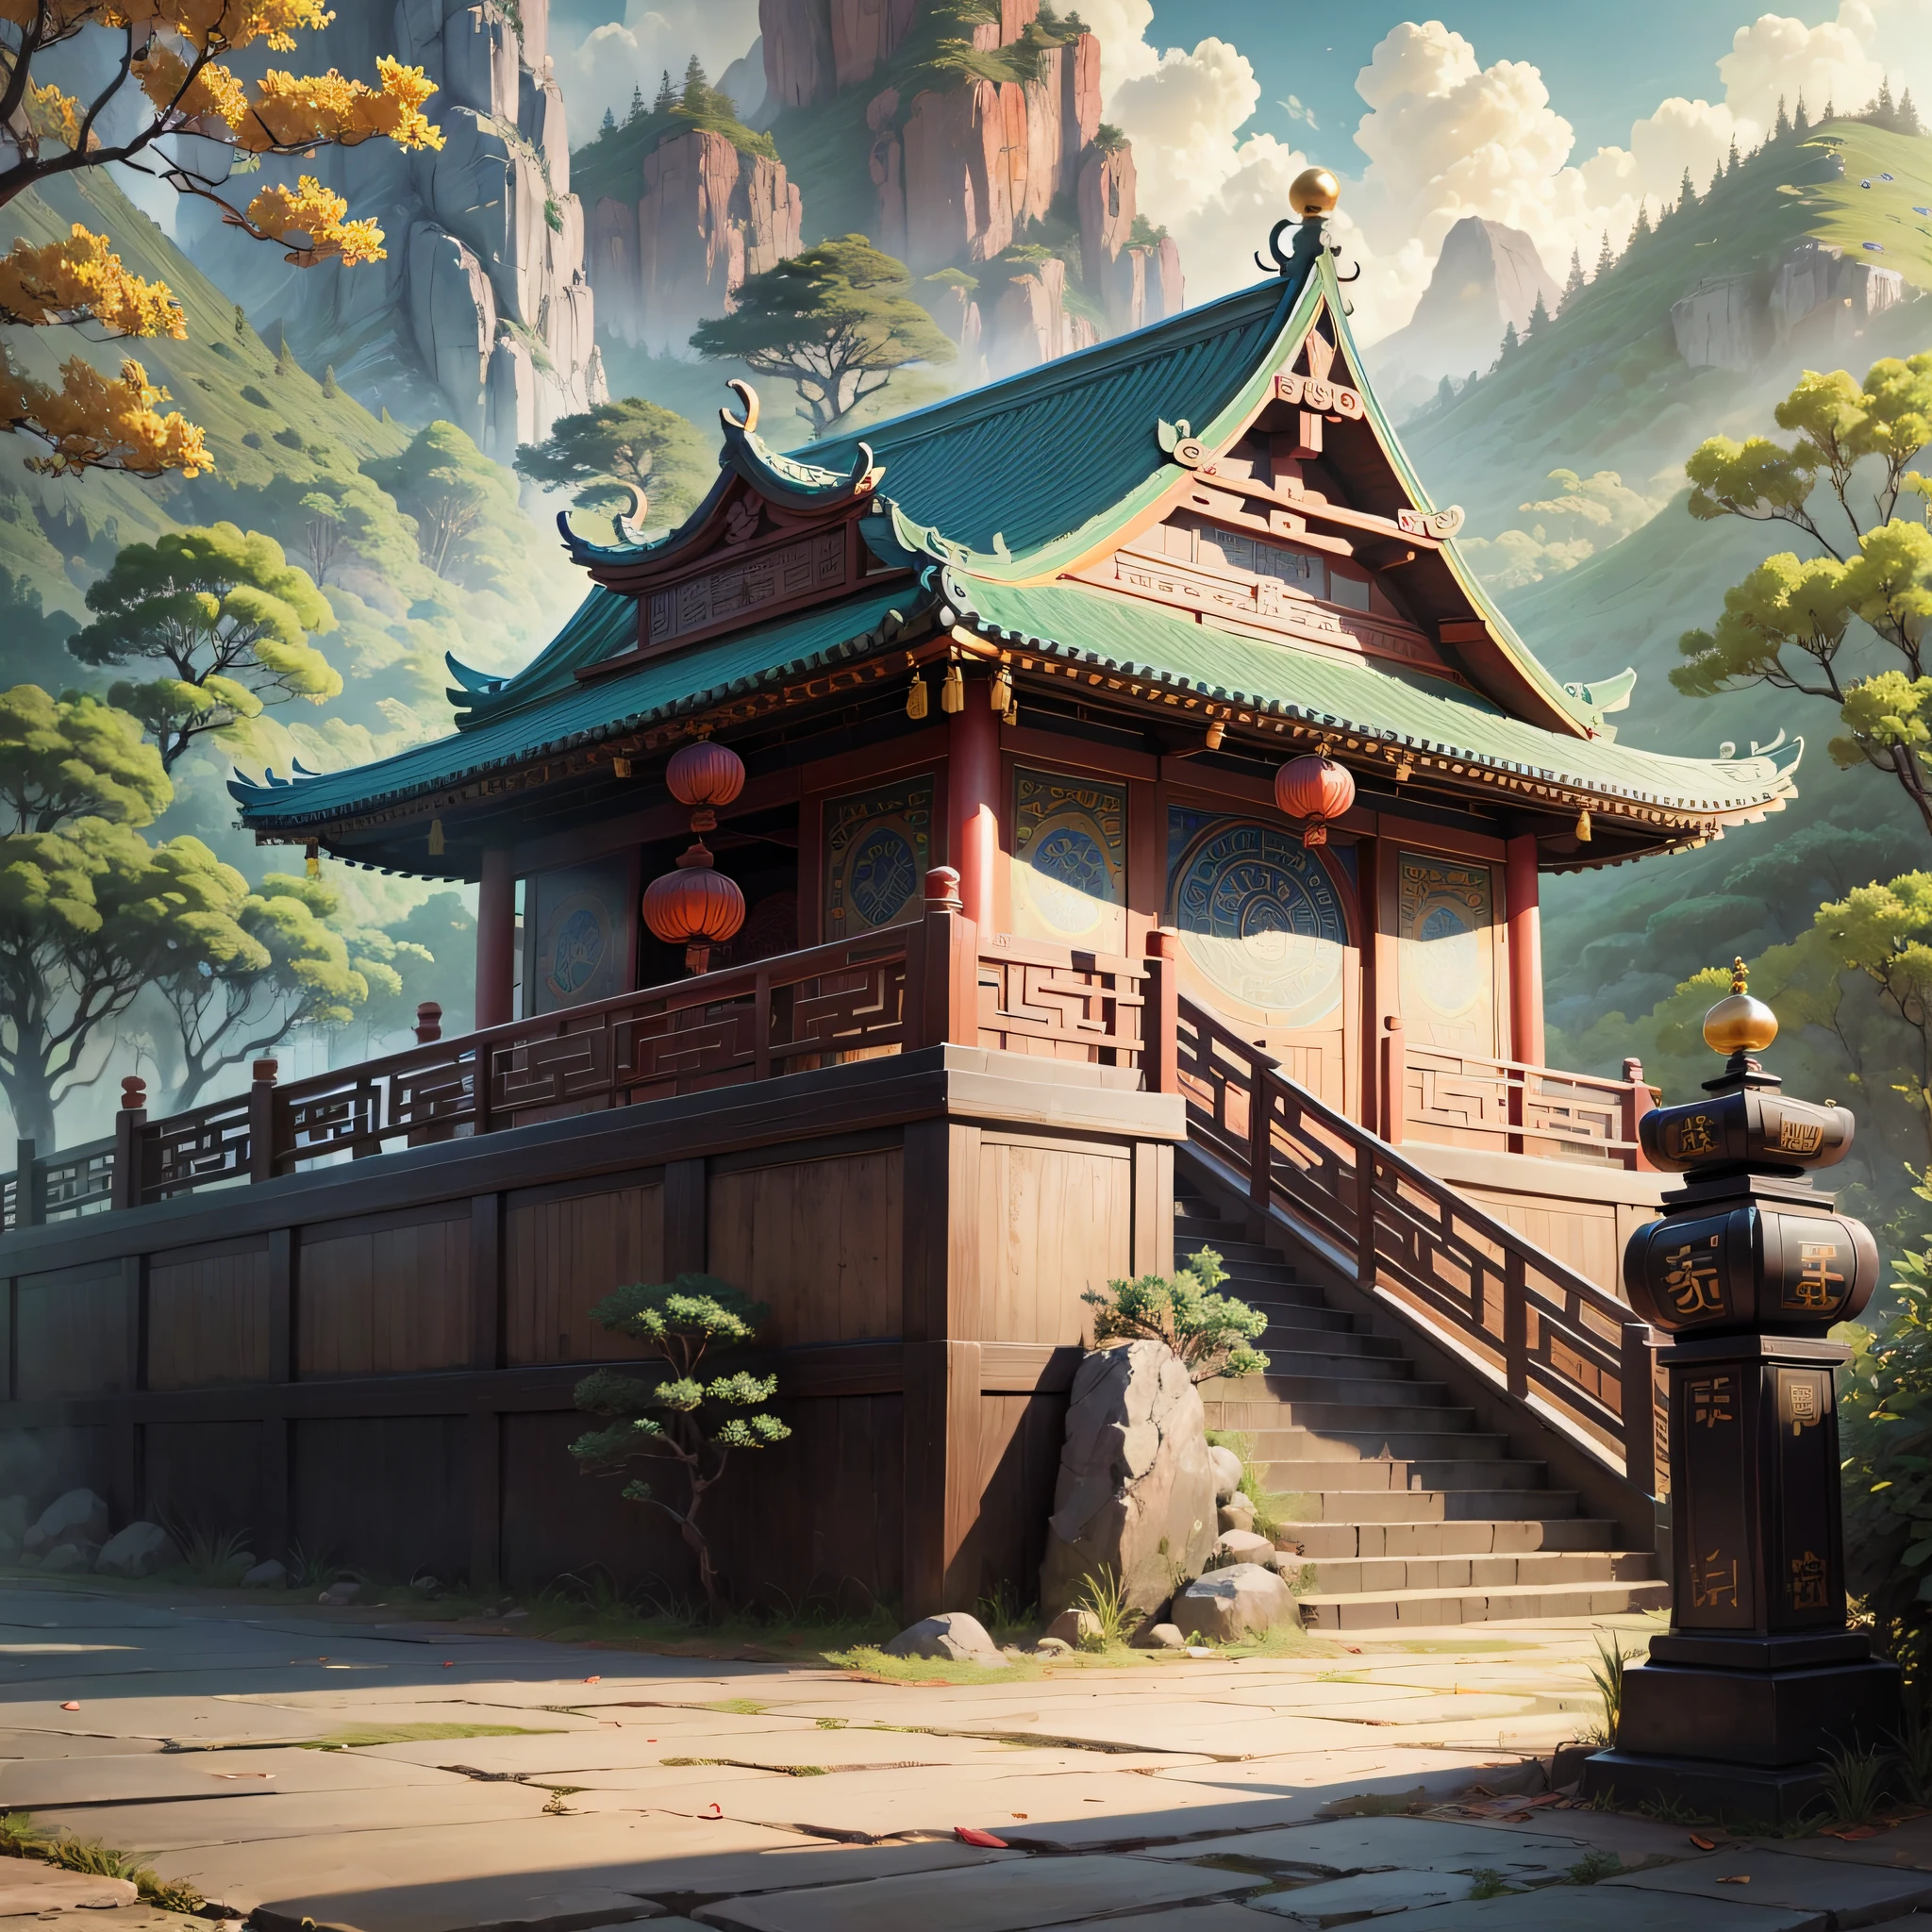 HD wallpaper: Painting, gold and brown temple anime scene illustration,  Artistic | Wallpaper Flare